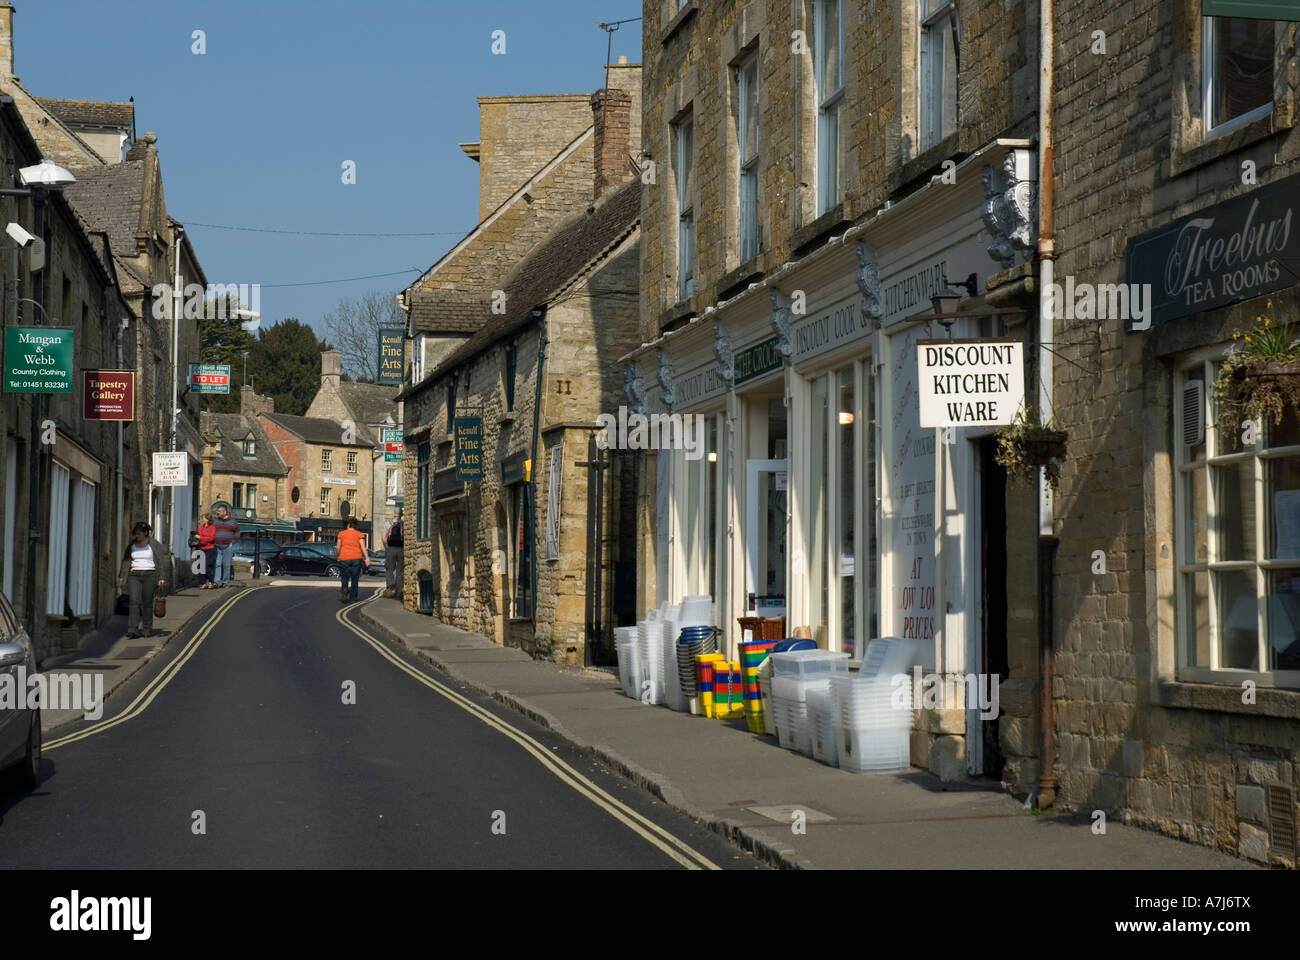 Digbeth Street, Stow on the Wold, England Stock Photo